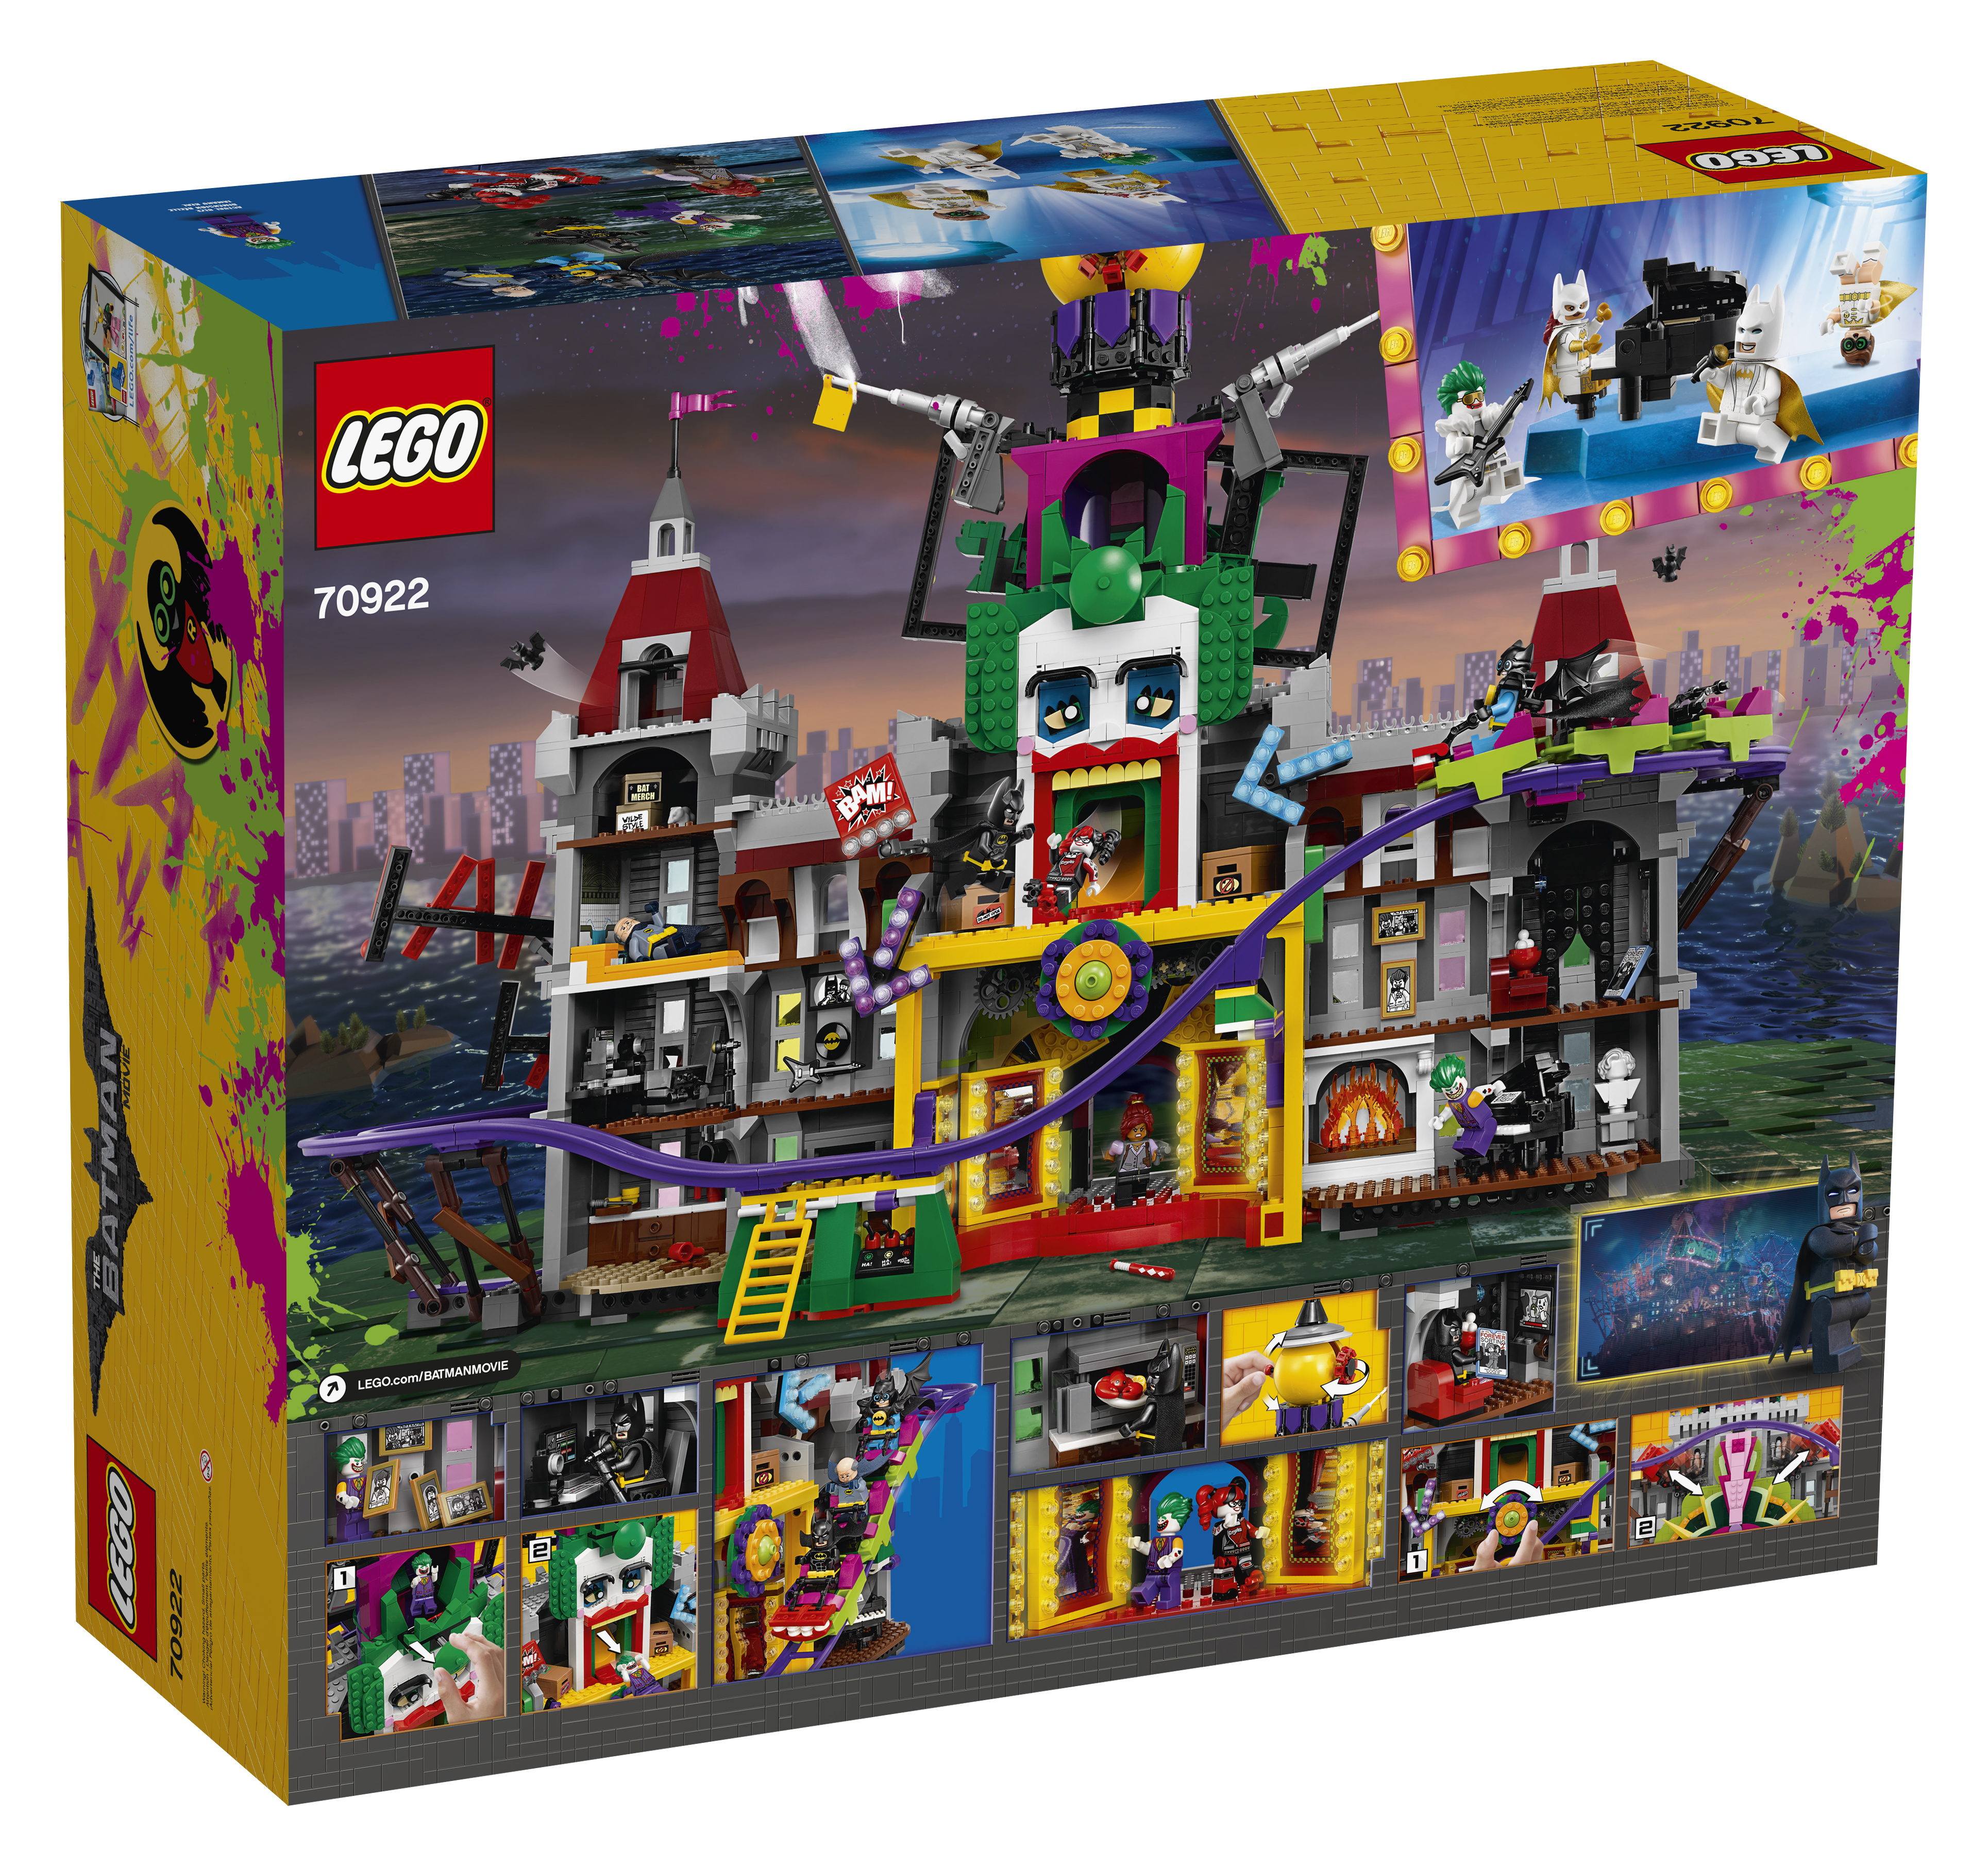 Lego Announces 3,444 Piece Joker Manor Set (Yes, As In The Lego Batman Movie  -- You'll Like This)